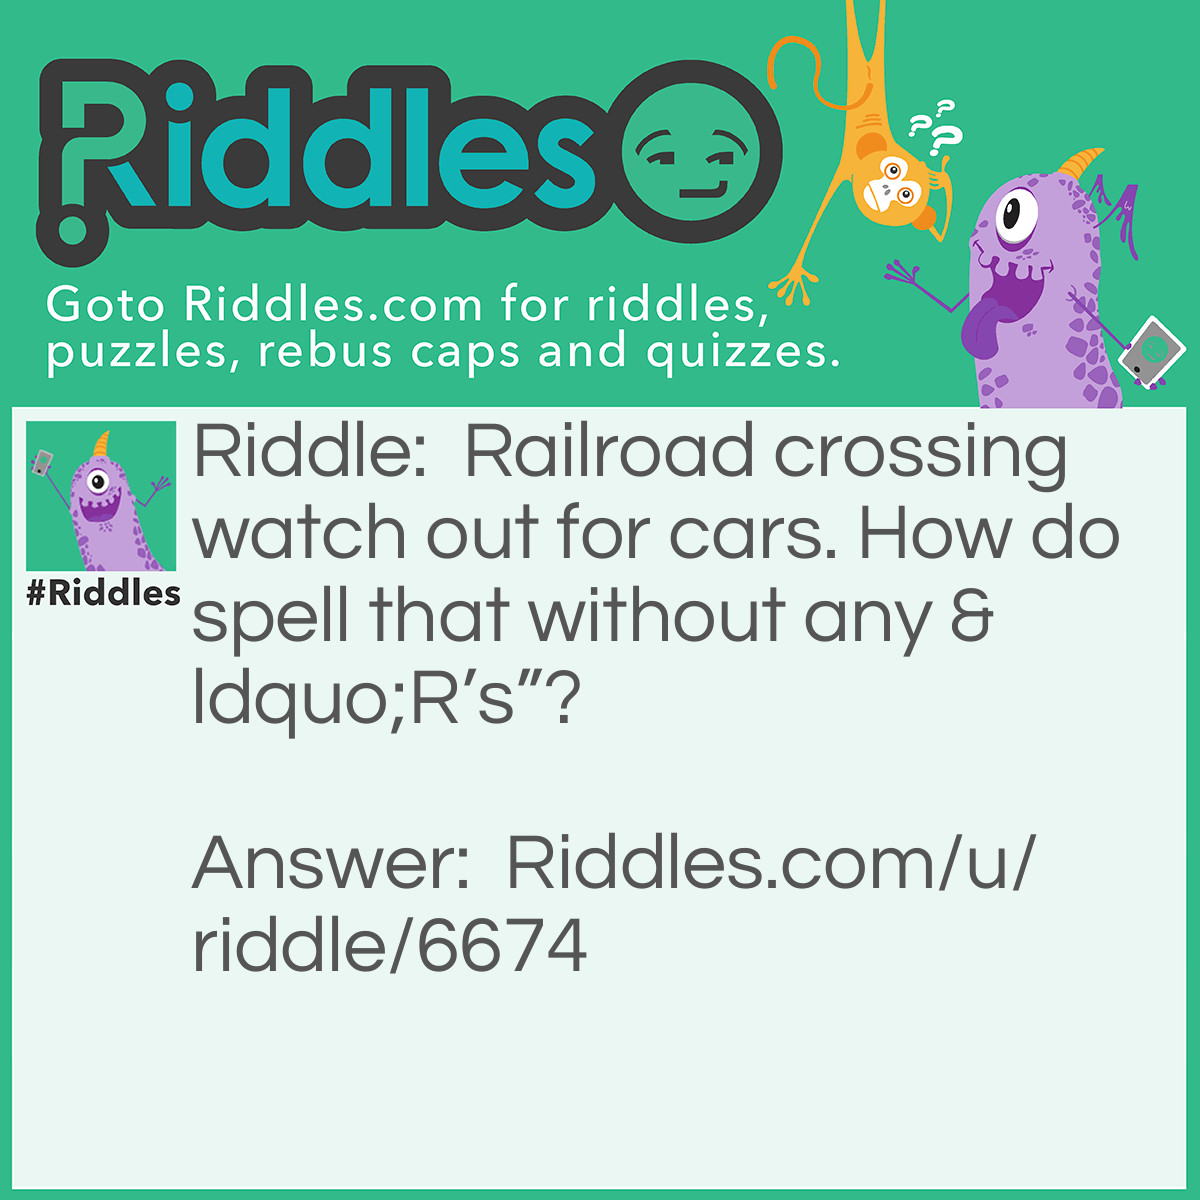 Riddle: Railroad crossing watch out for cars. How do spell that without any "R's"? Answer: THAT. Spell “that” without any “R’s”!